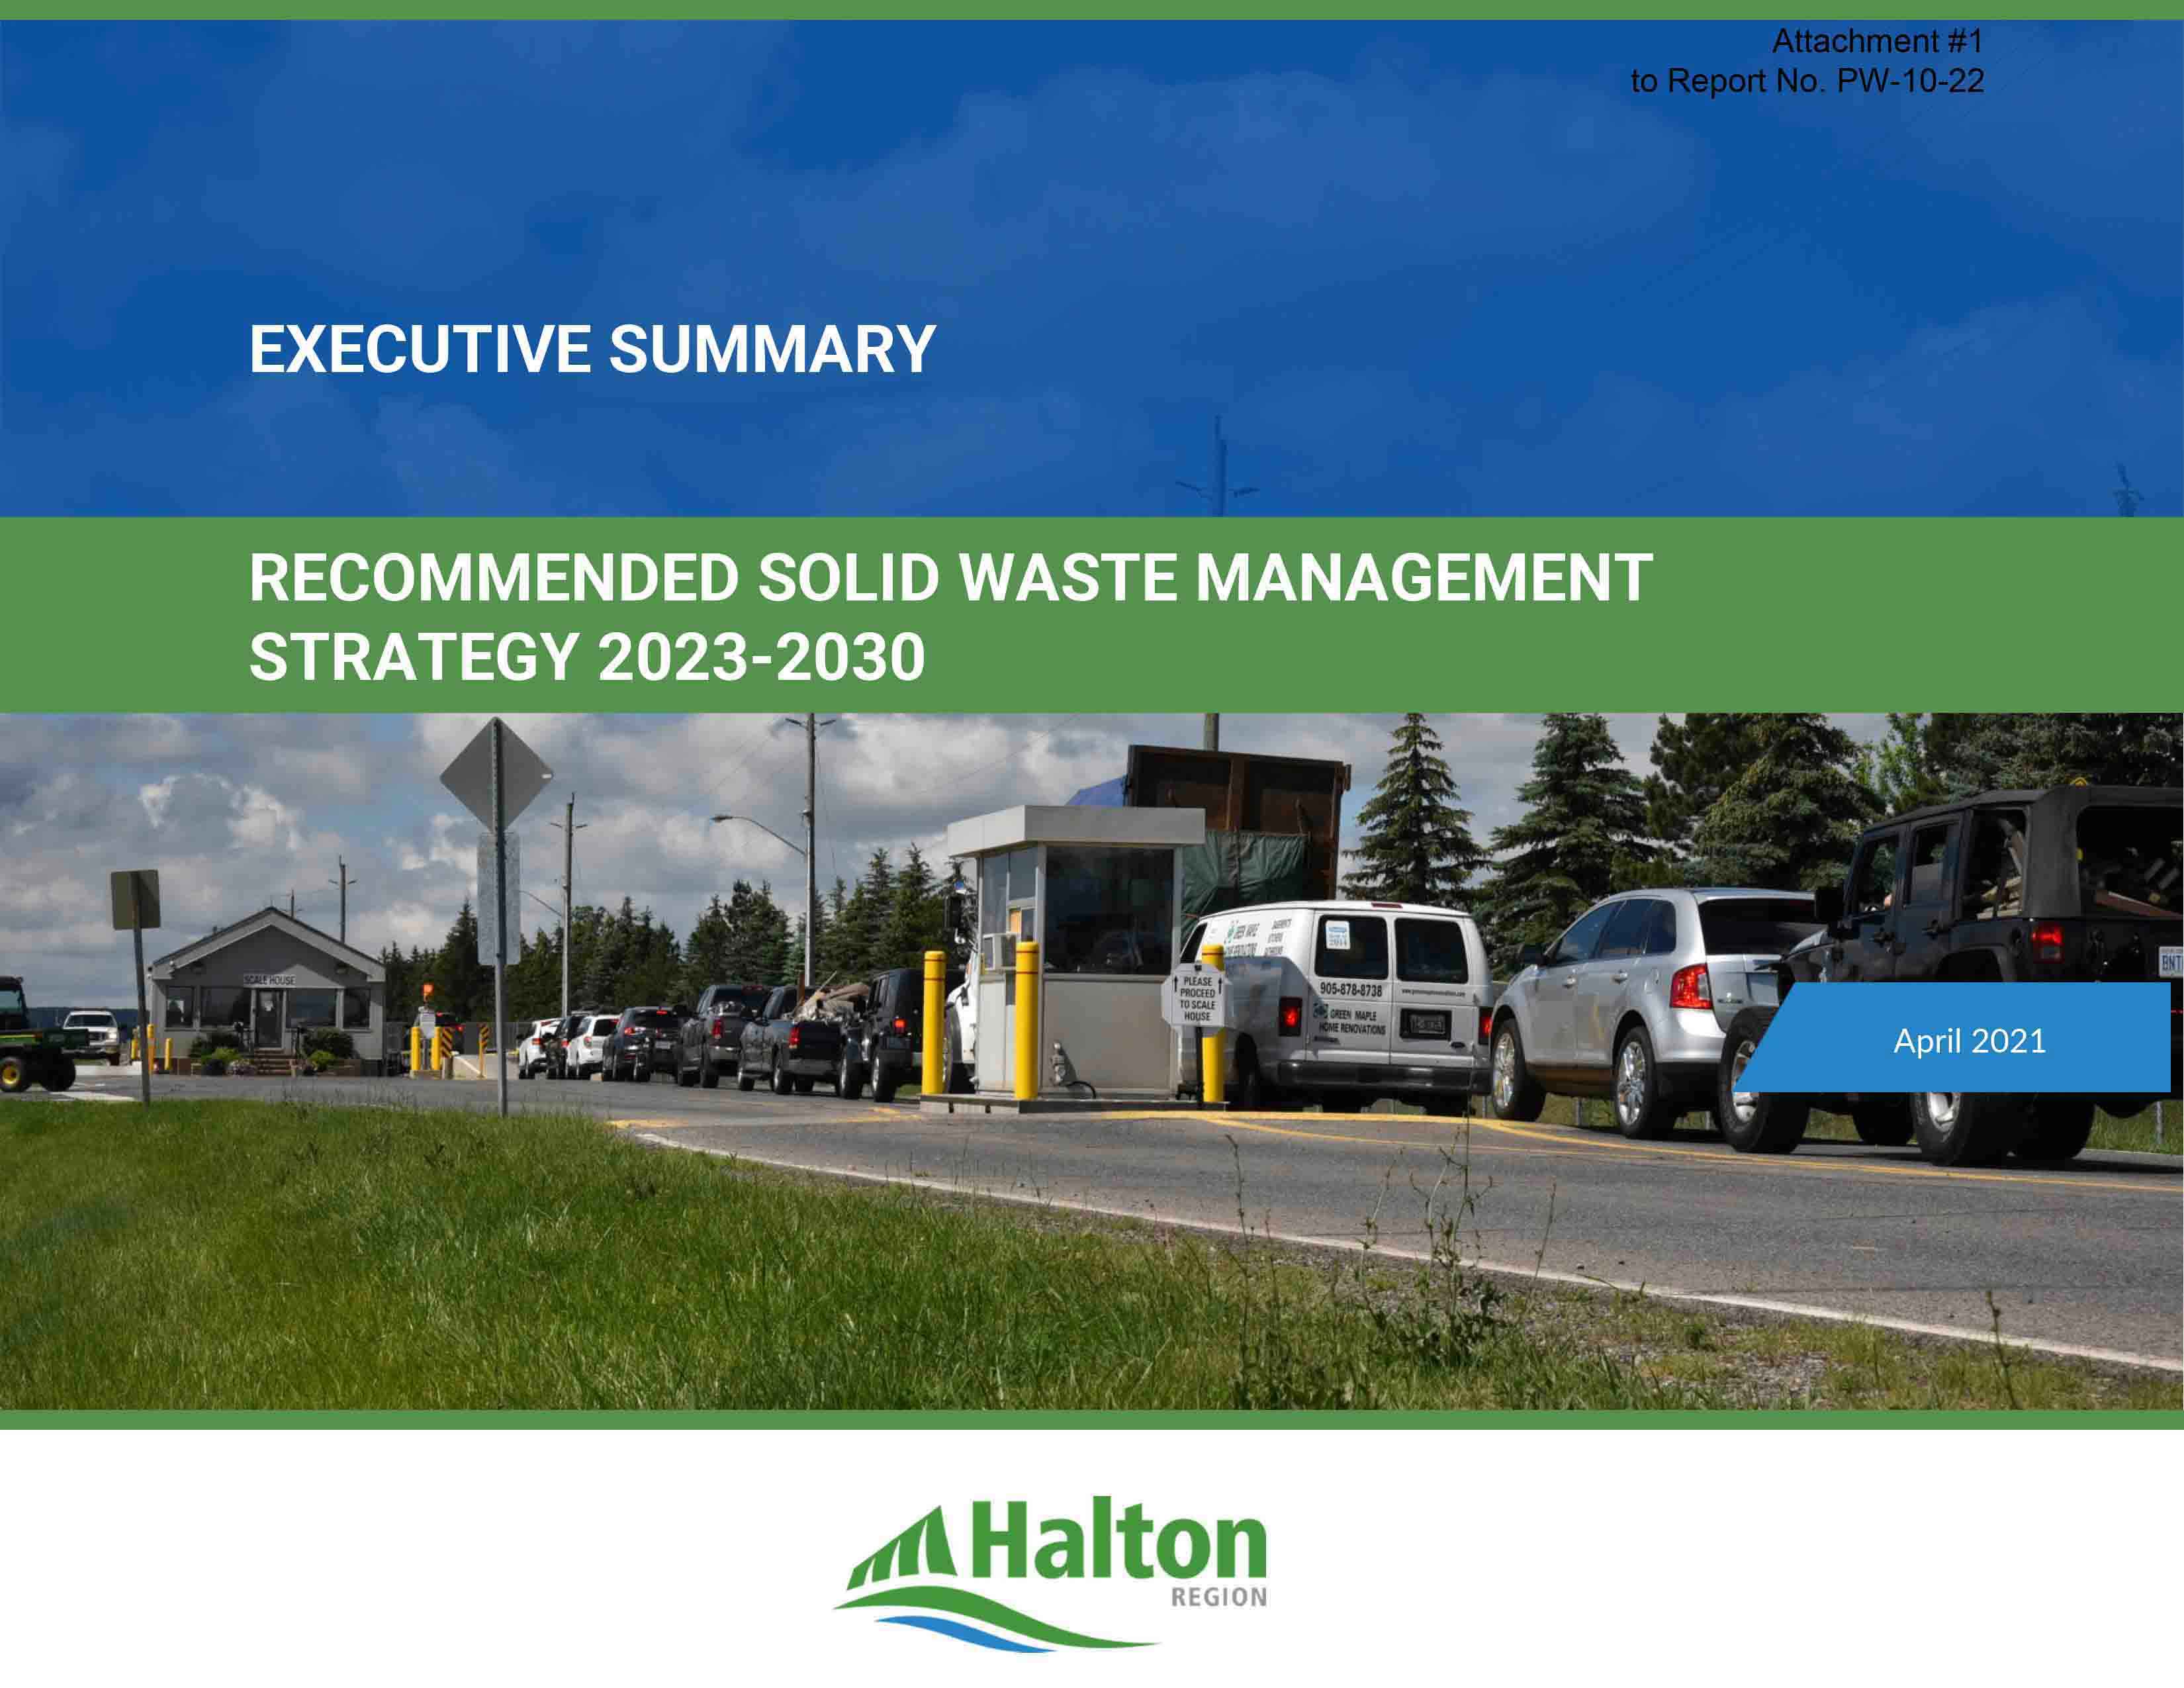 Recommended Solid Waste Management Strategy (2023-2030) 